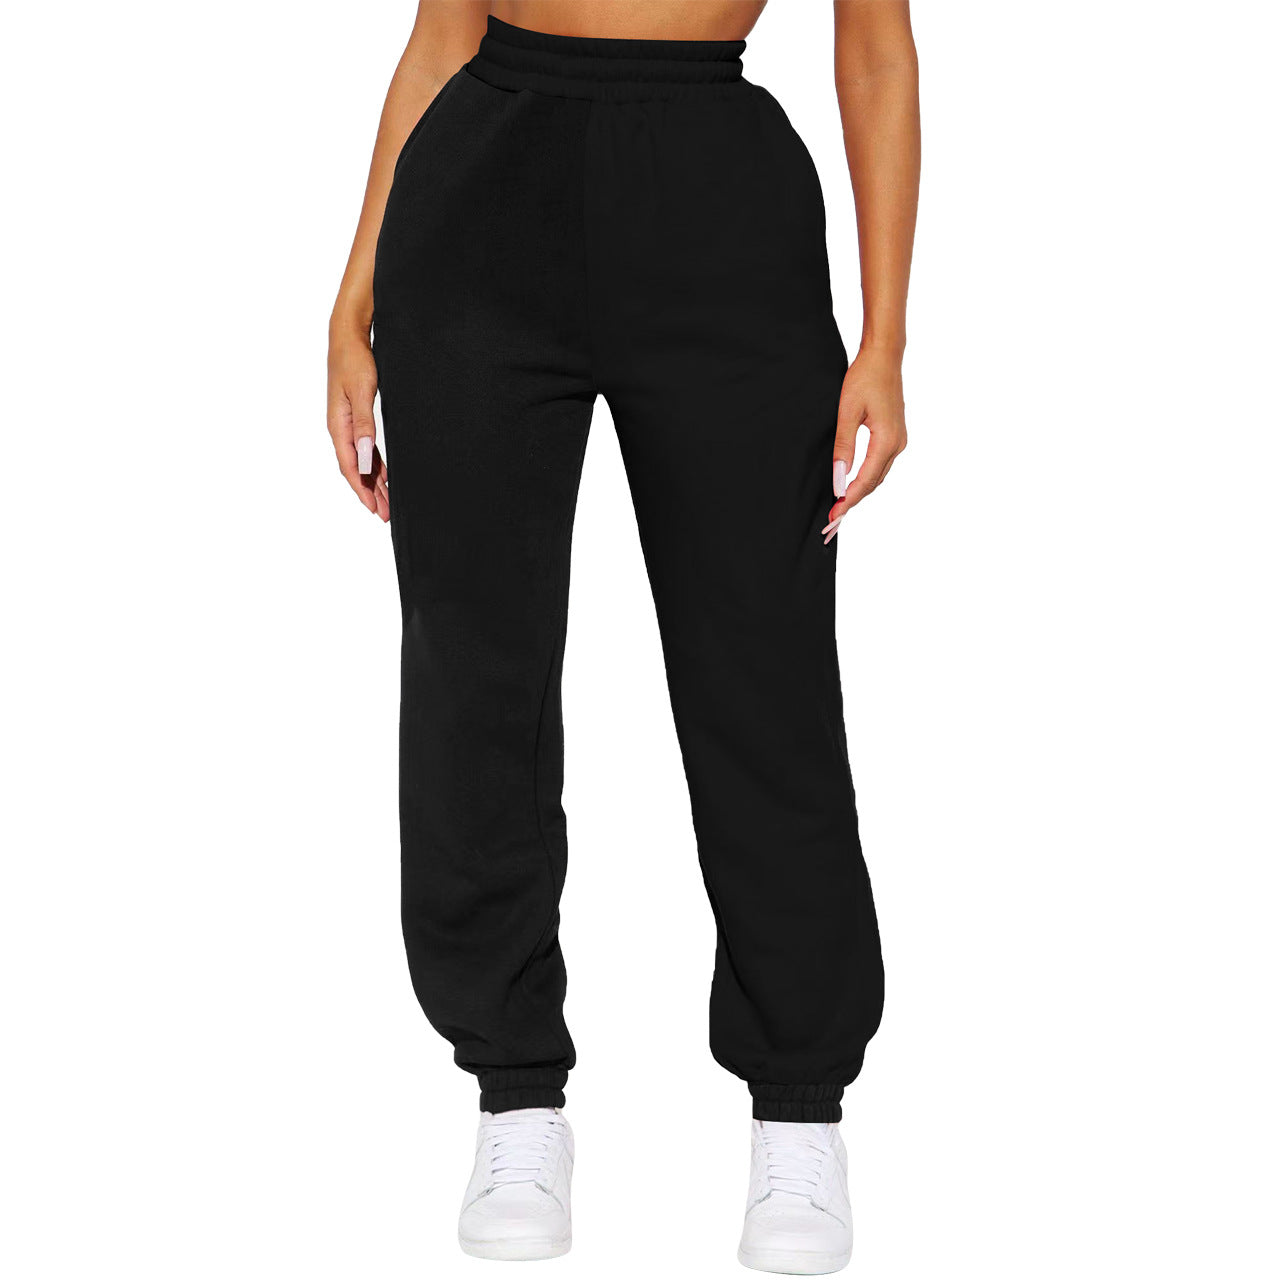 BamBam Women Casual Solid Zipper Hoodies and Pant Two-Piece Set - BamBam